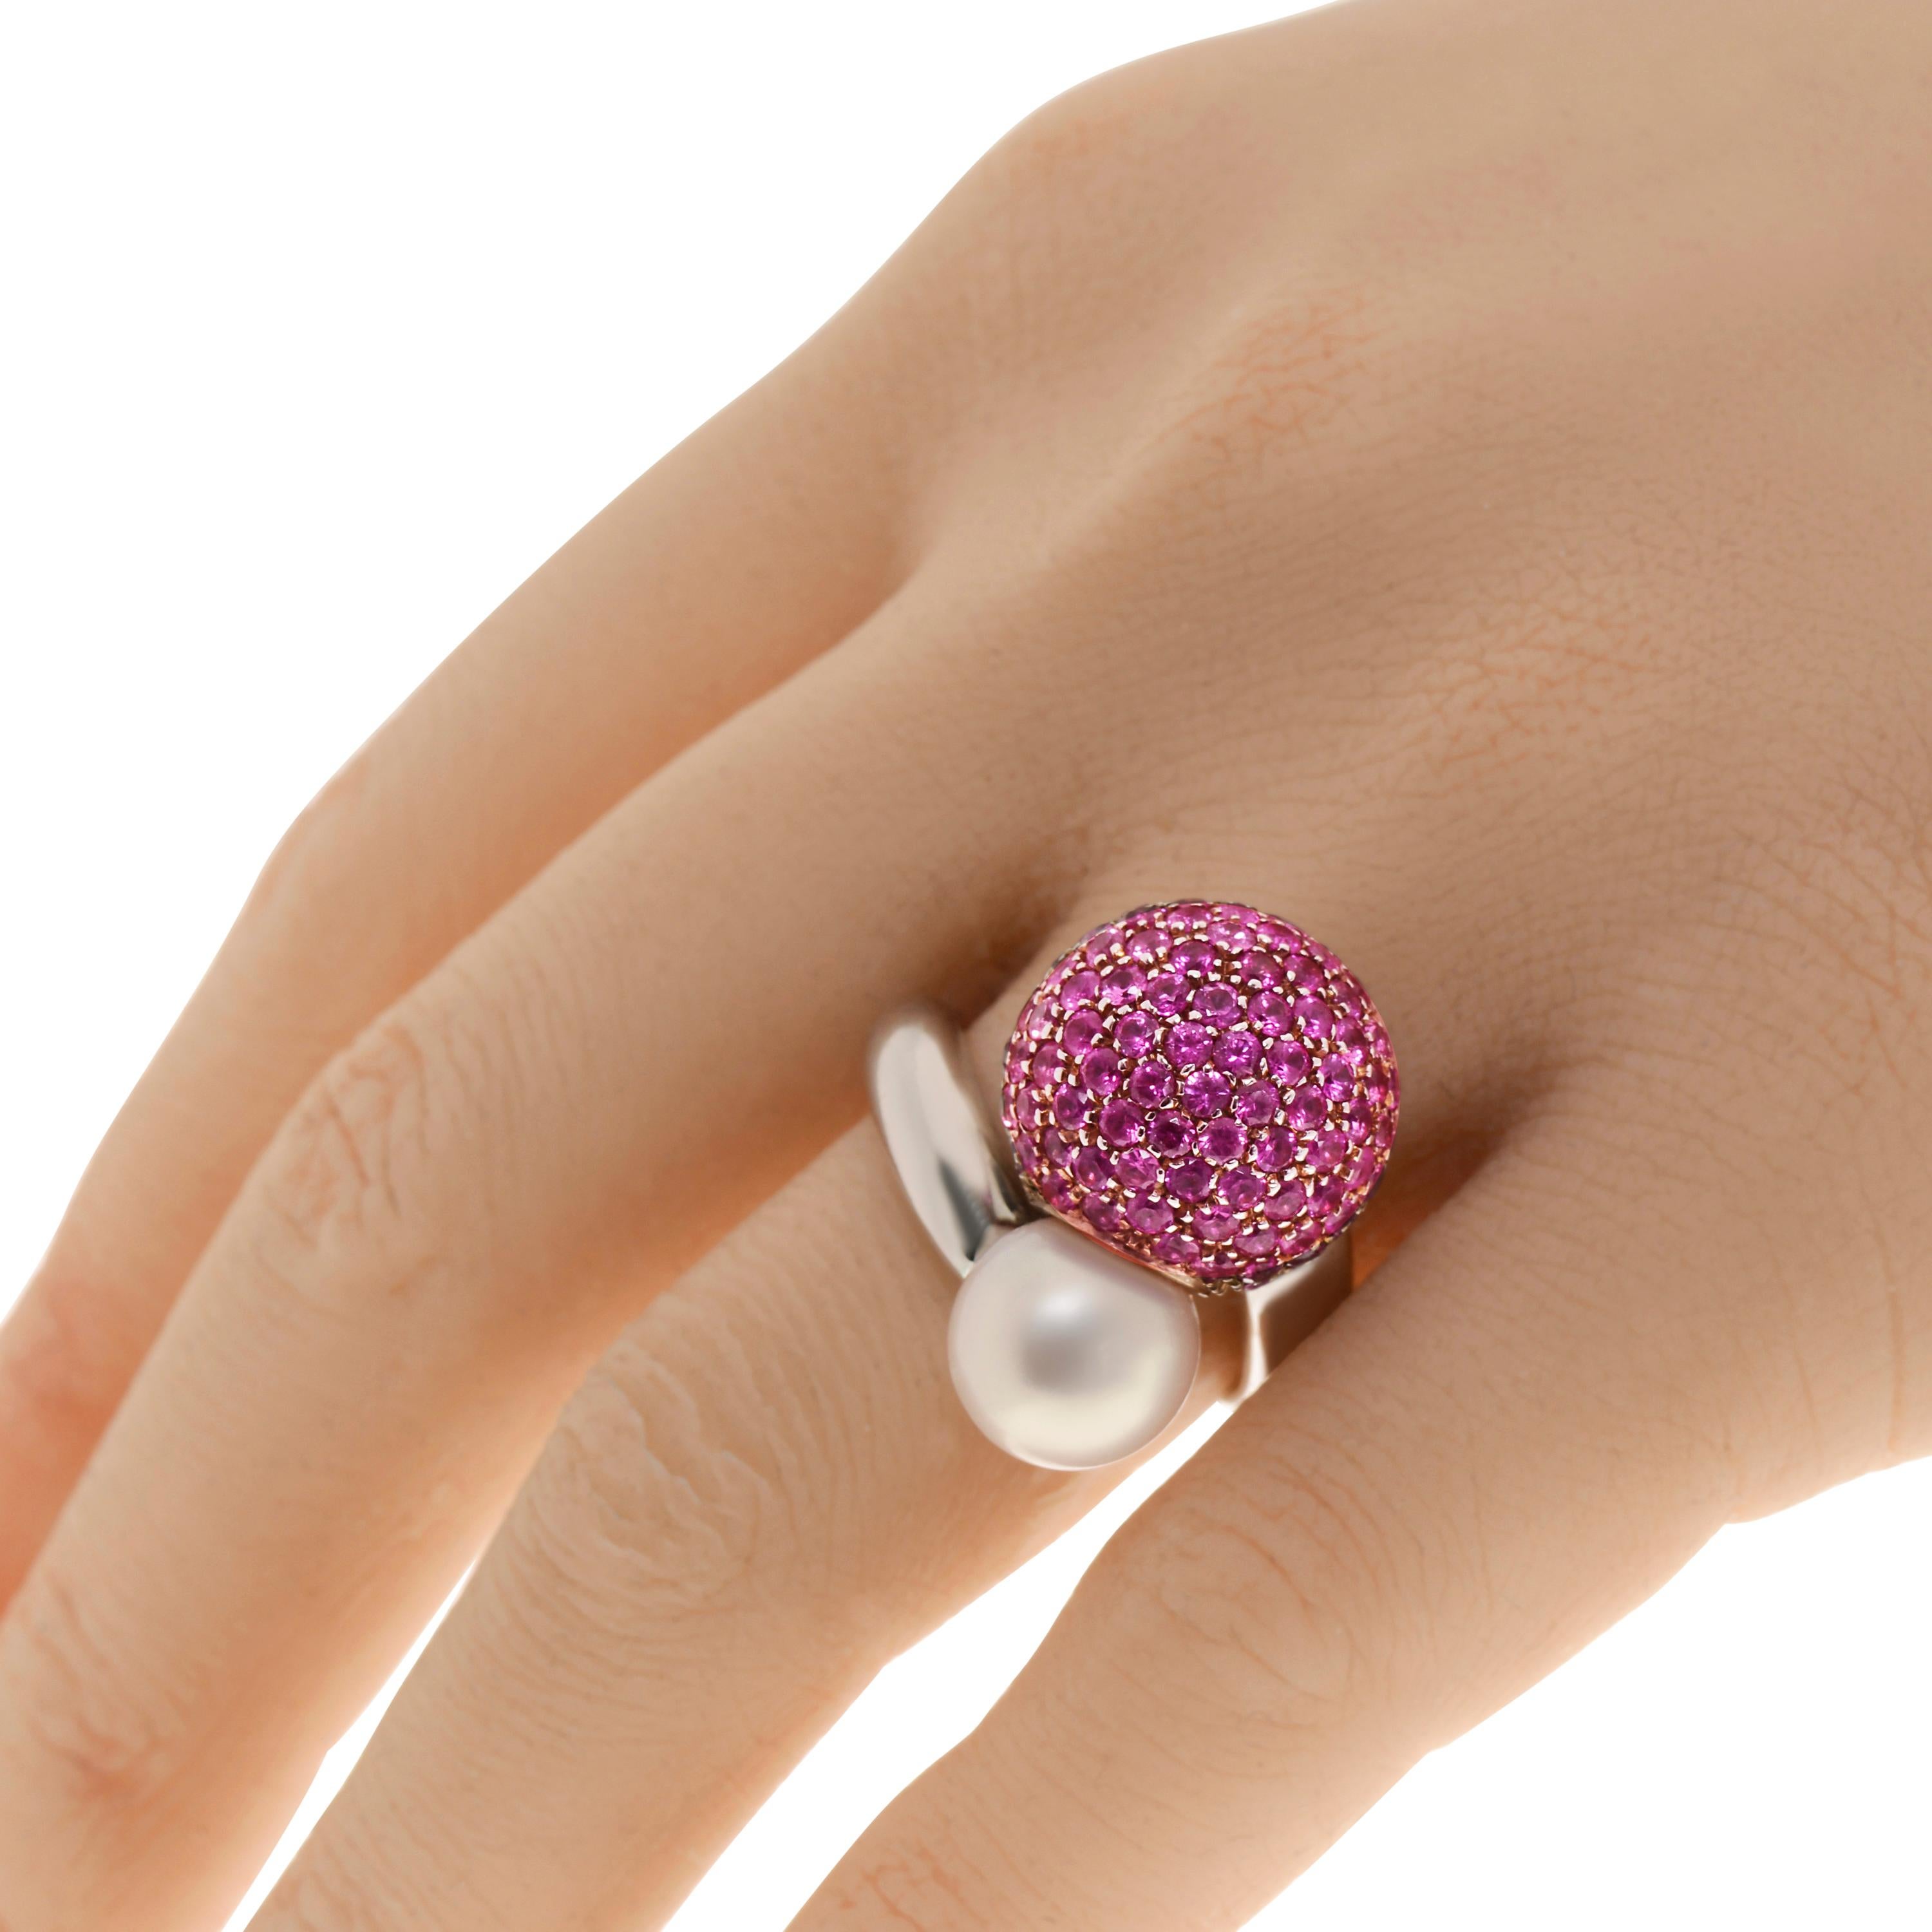 This bejeweled Piero Milano 18K White Gold Cocktail Ring features a shimmering sphere of pink sapphire pave 4.64ct tw with a luminous1.5g pearl at each end of a polished white gold ring that wraps around your finger. The ring size is 8. The